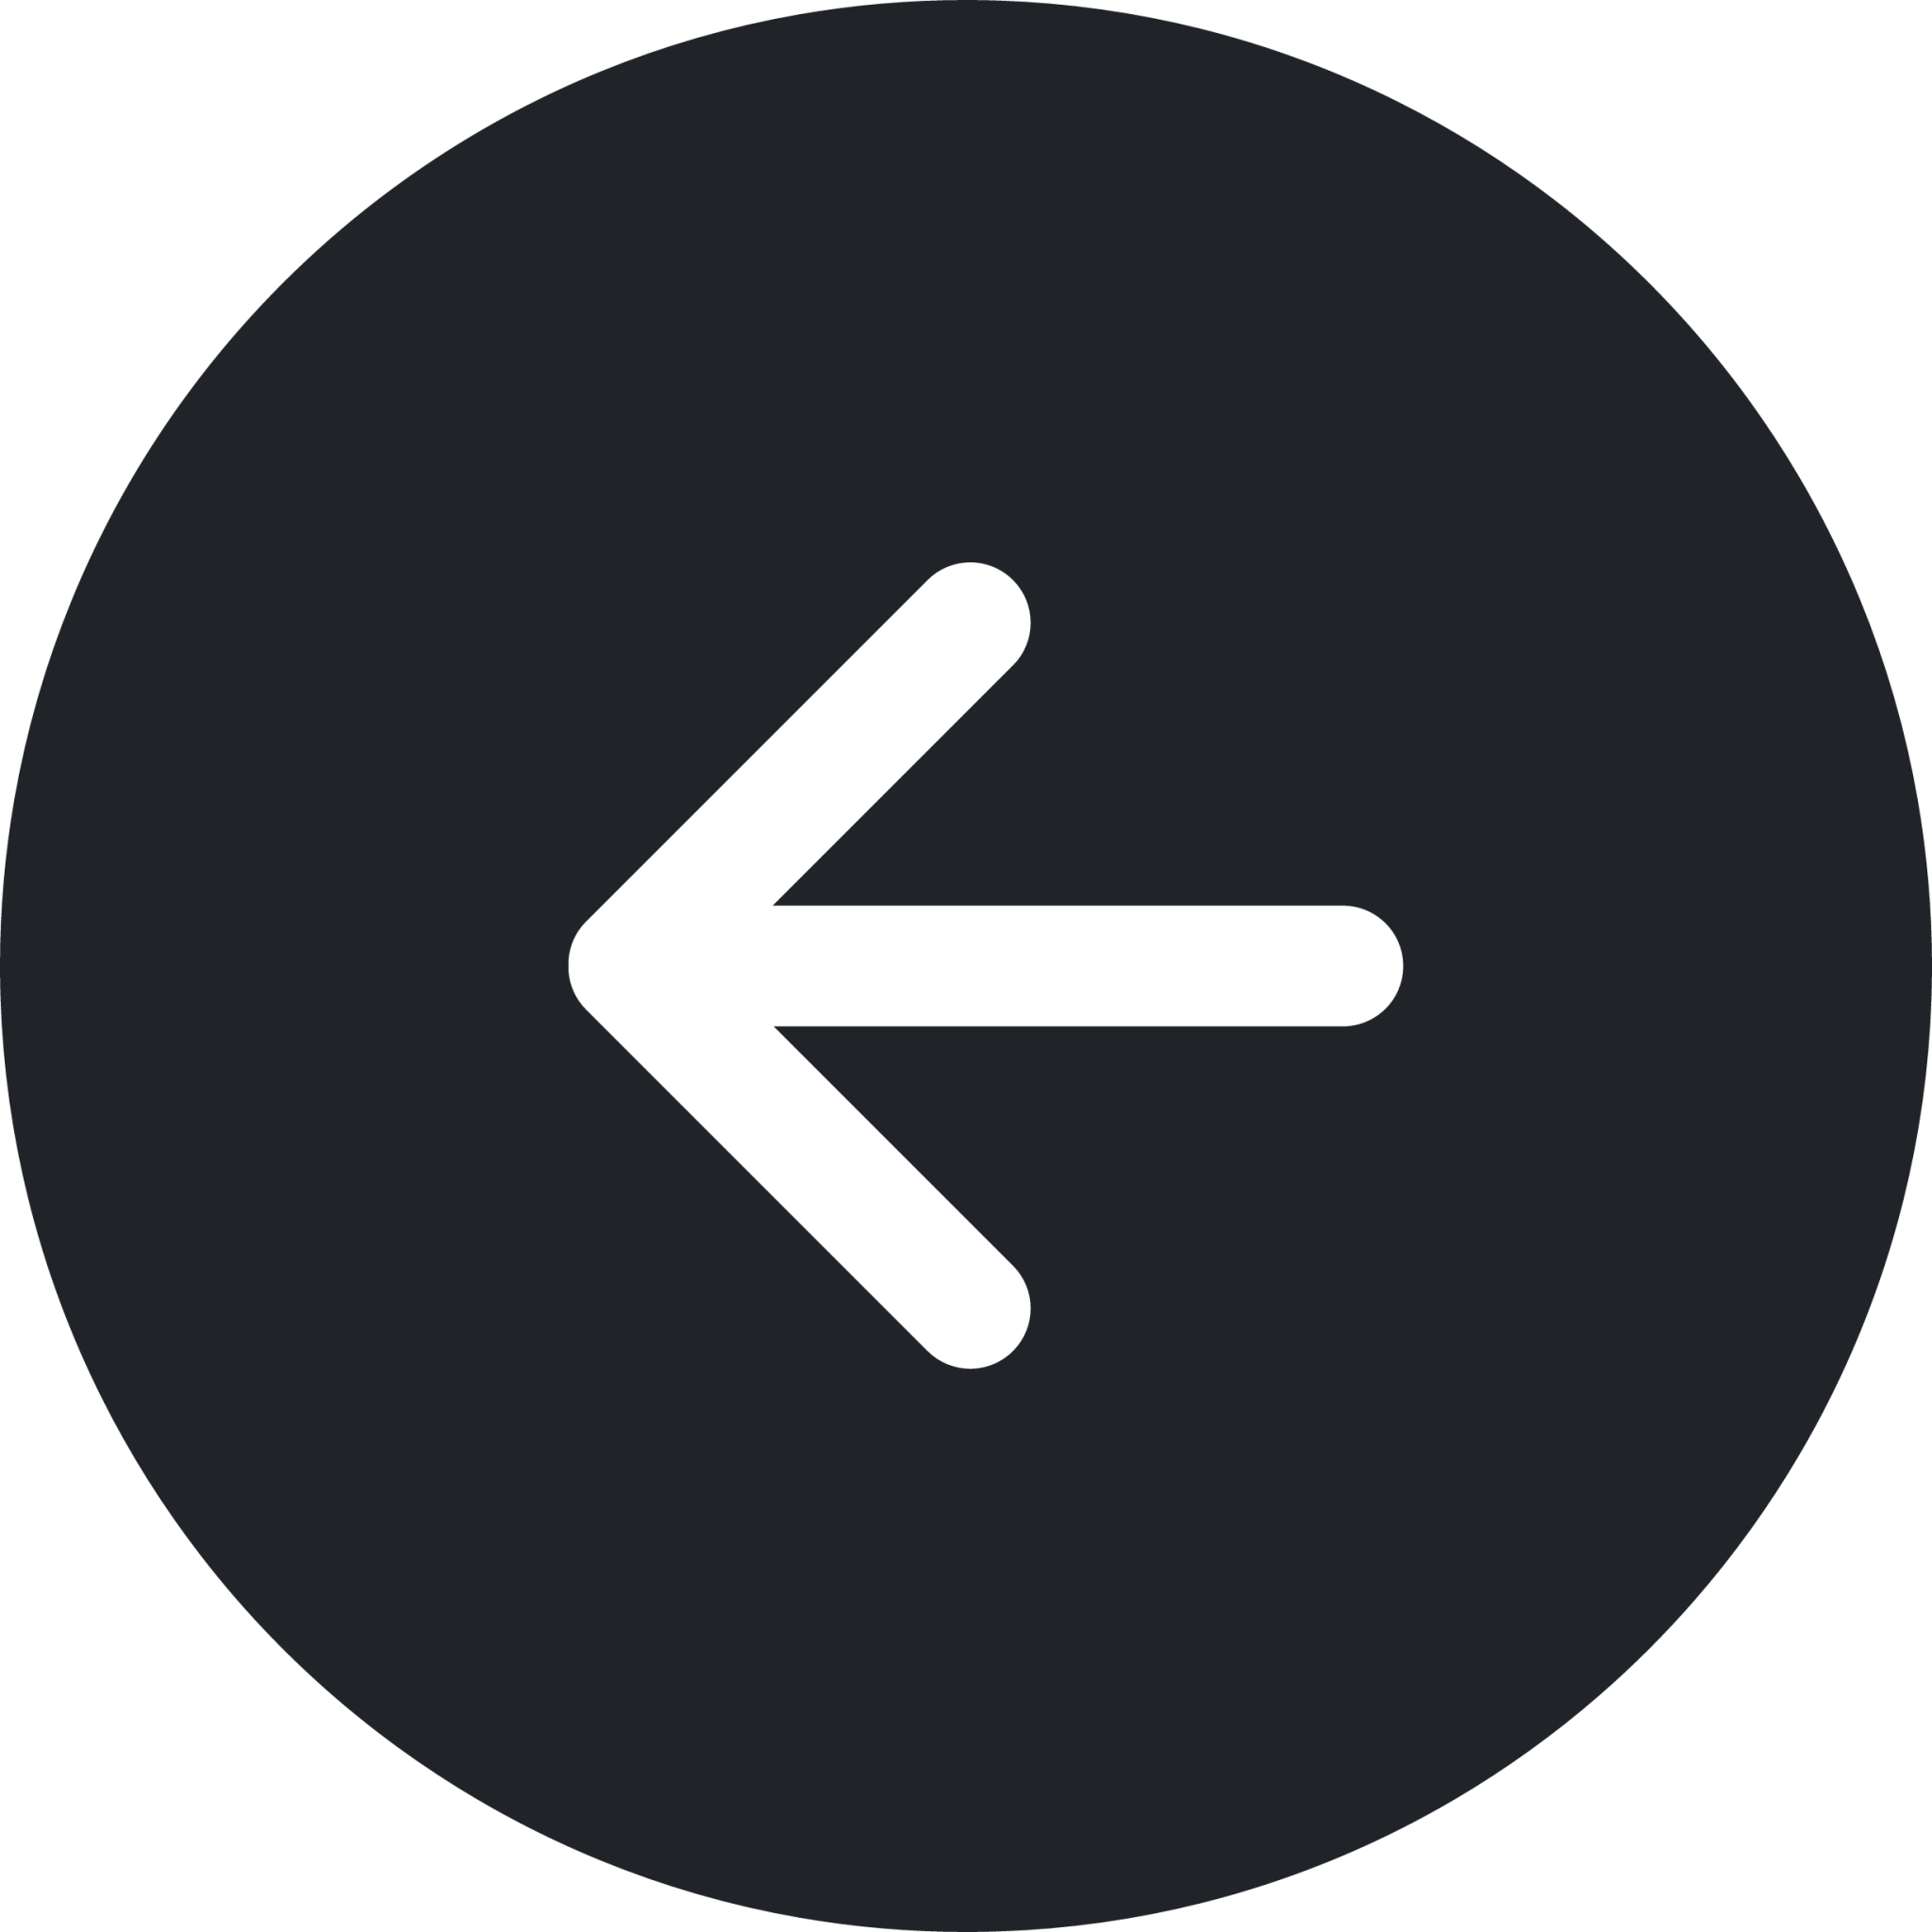 toleft (rounded filled) icon